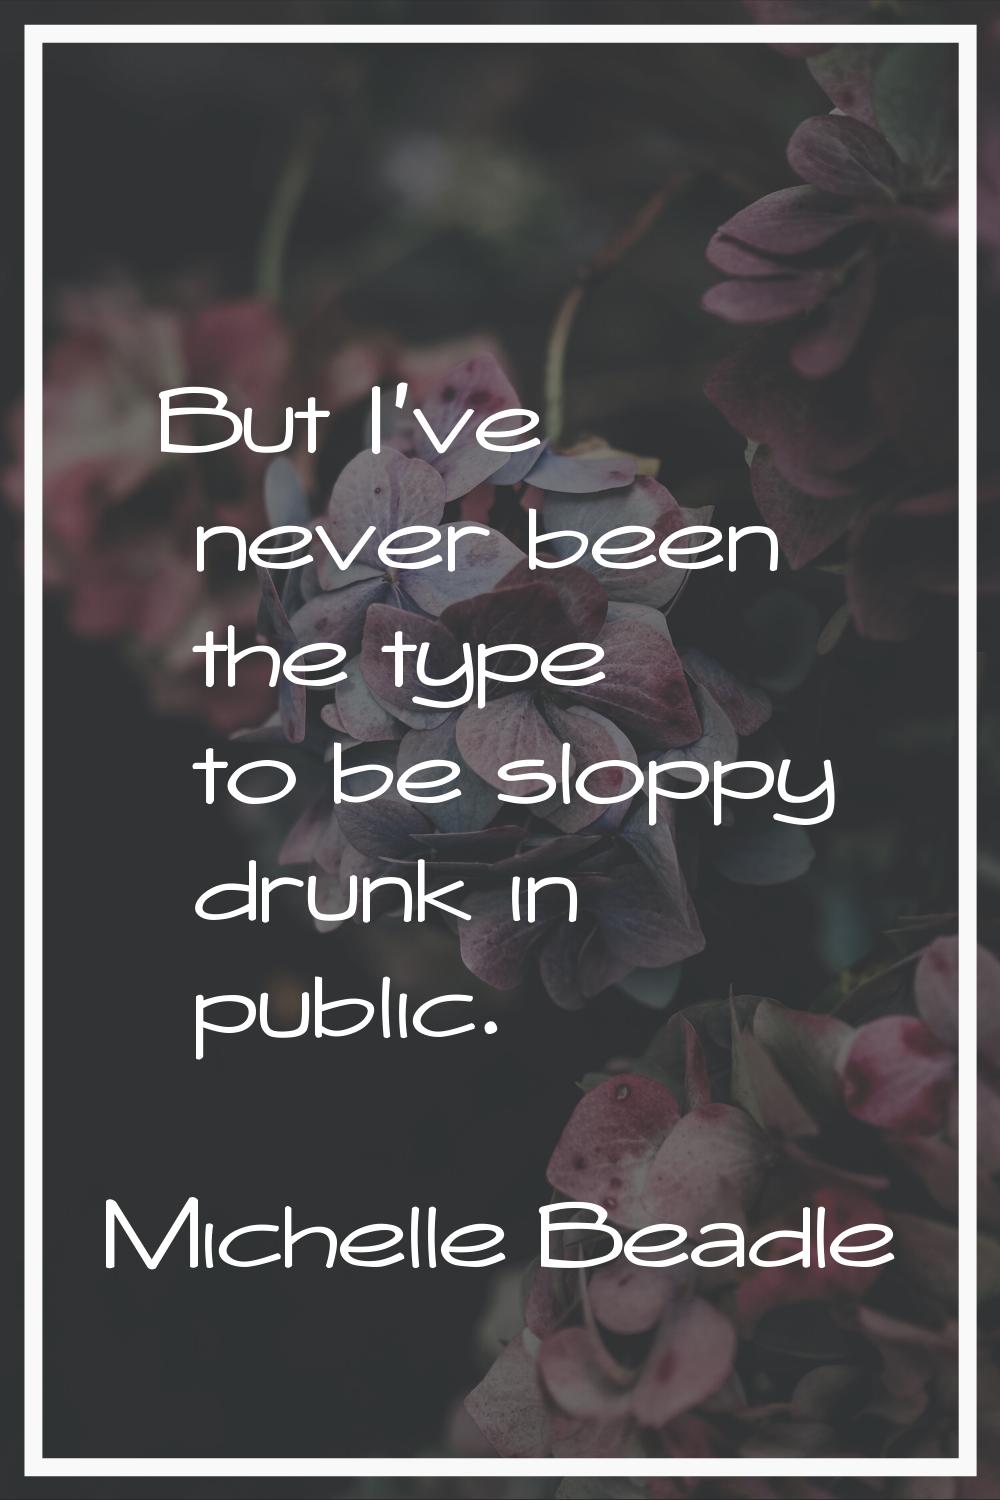 But I've never been the type to be sloppy drunk in public.